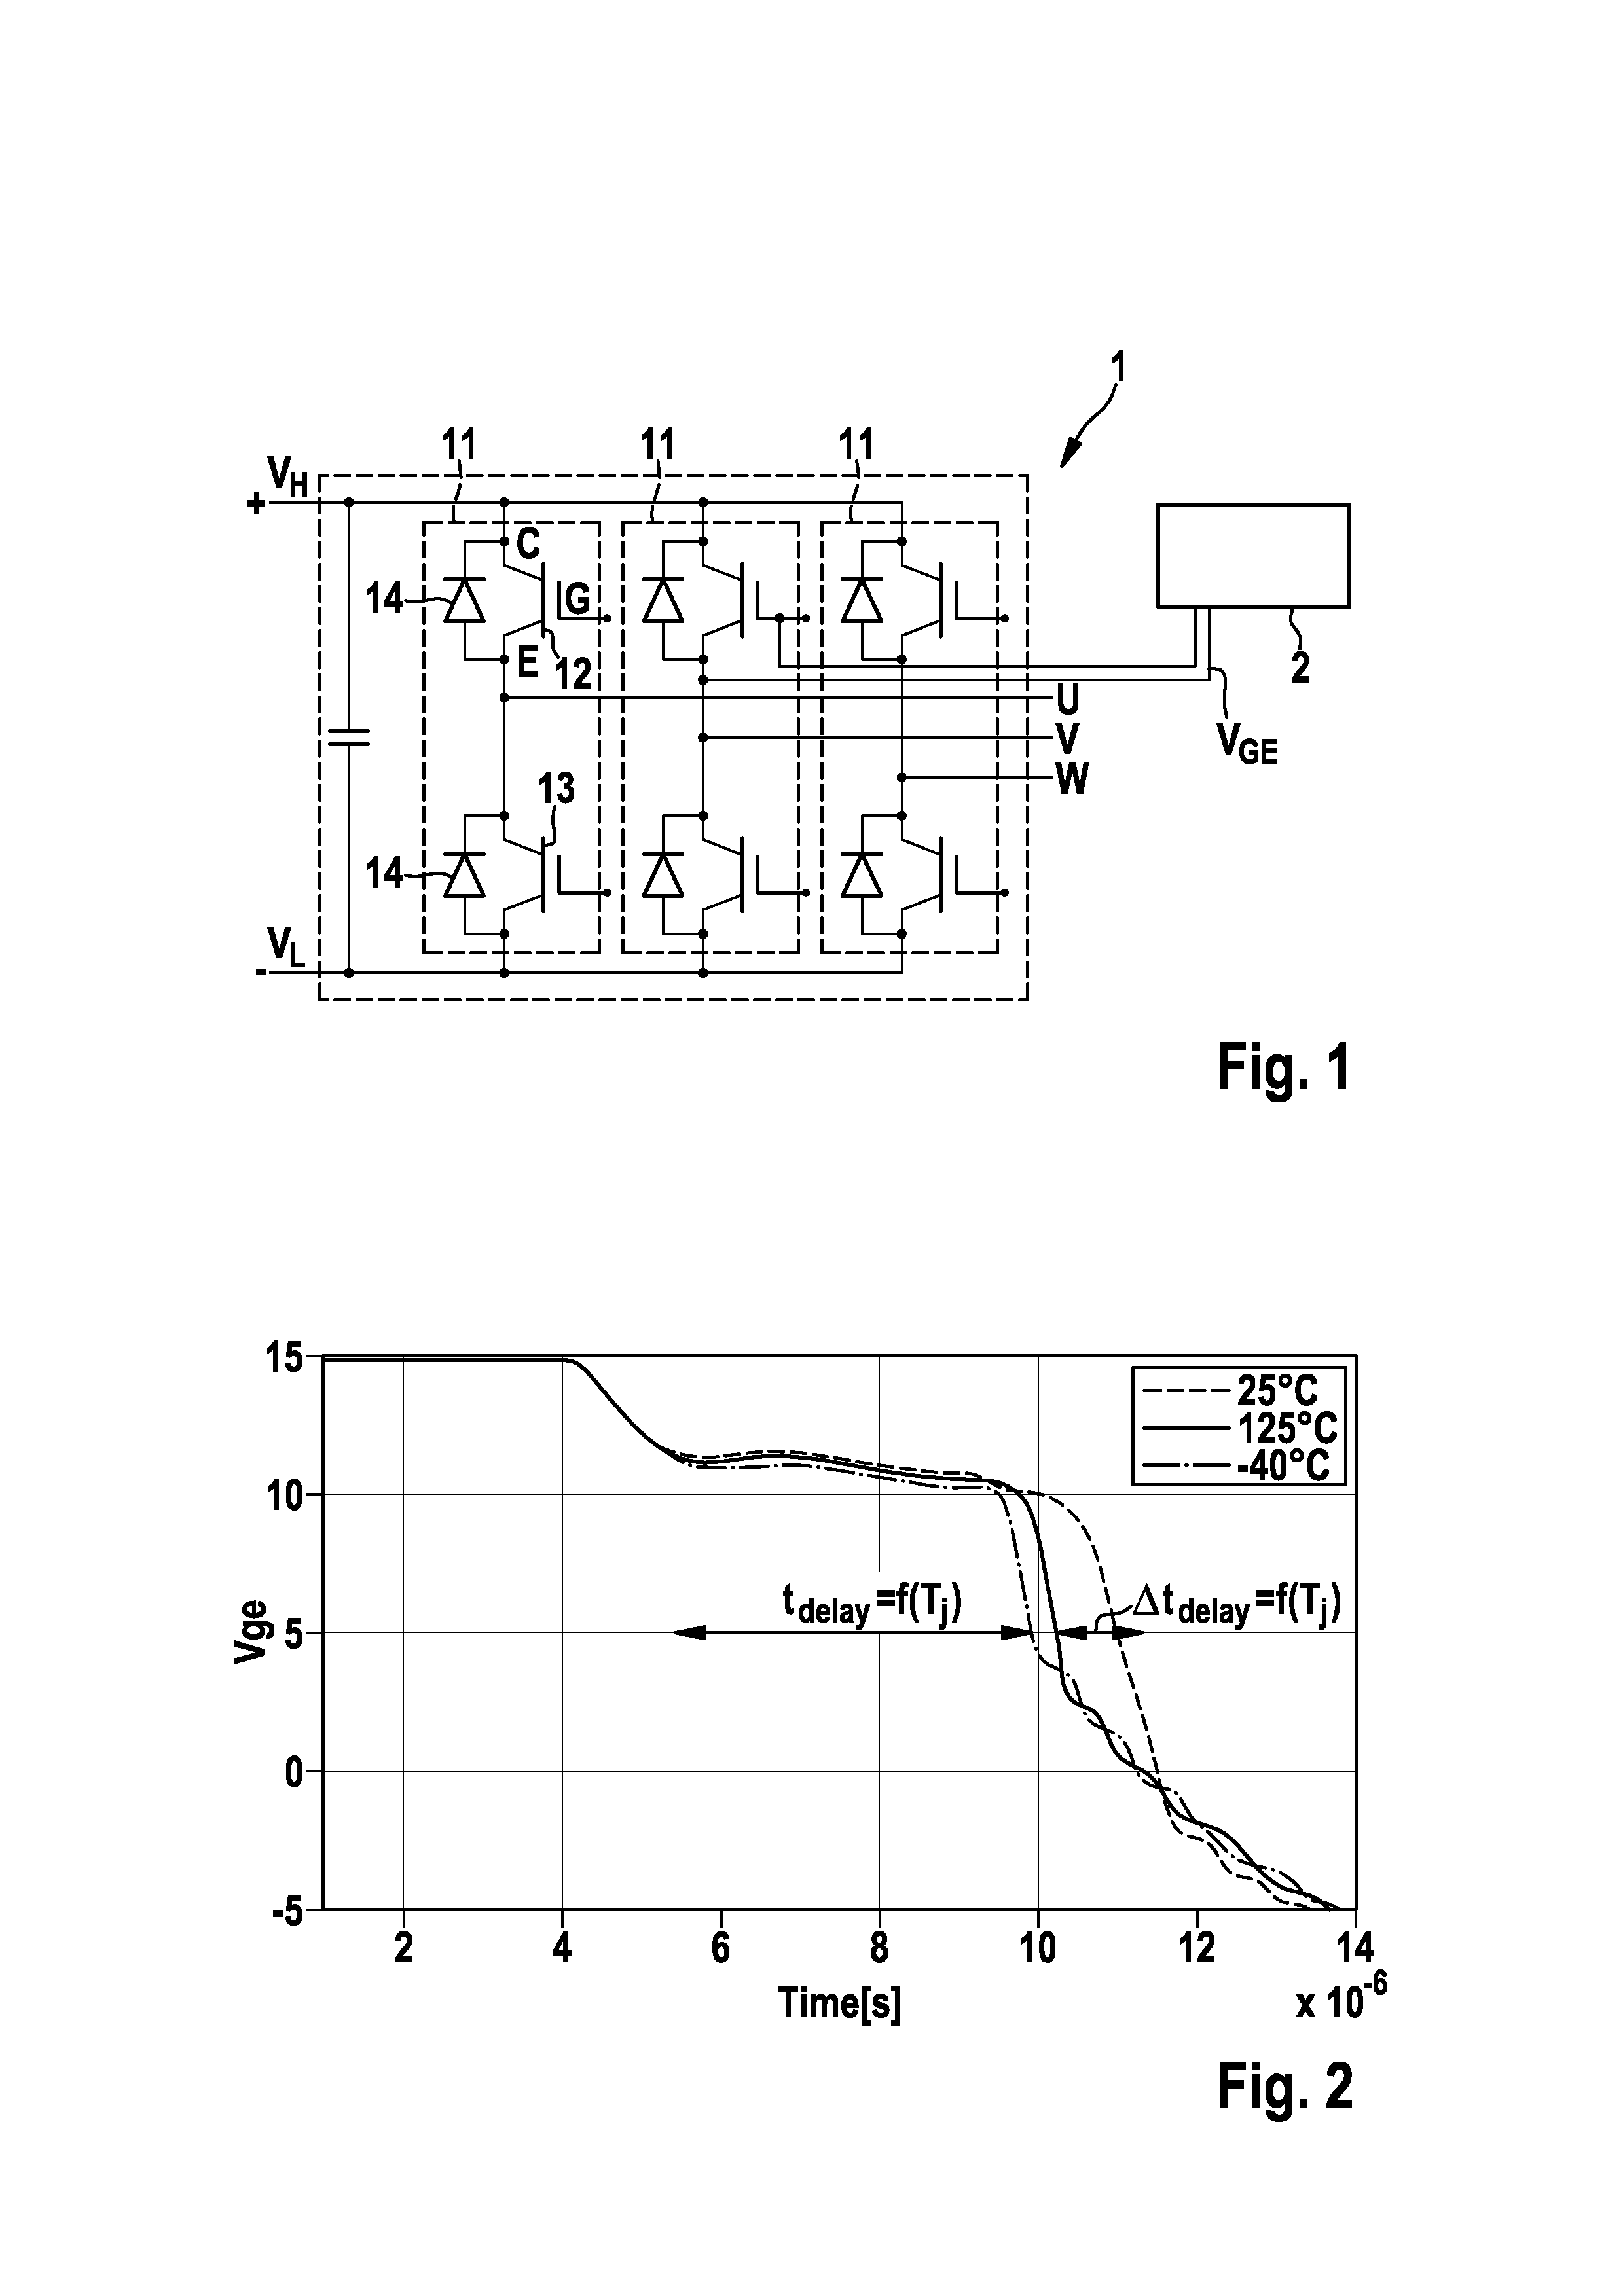 System and method for monitoring in real time the operating state of an IGBT device